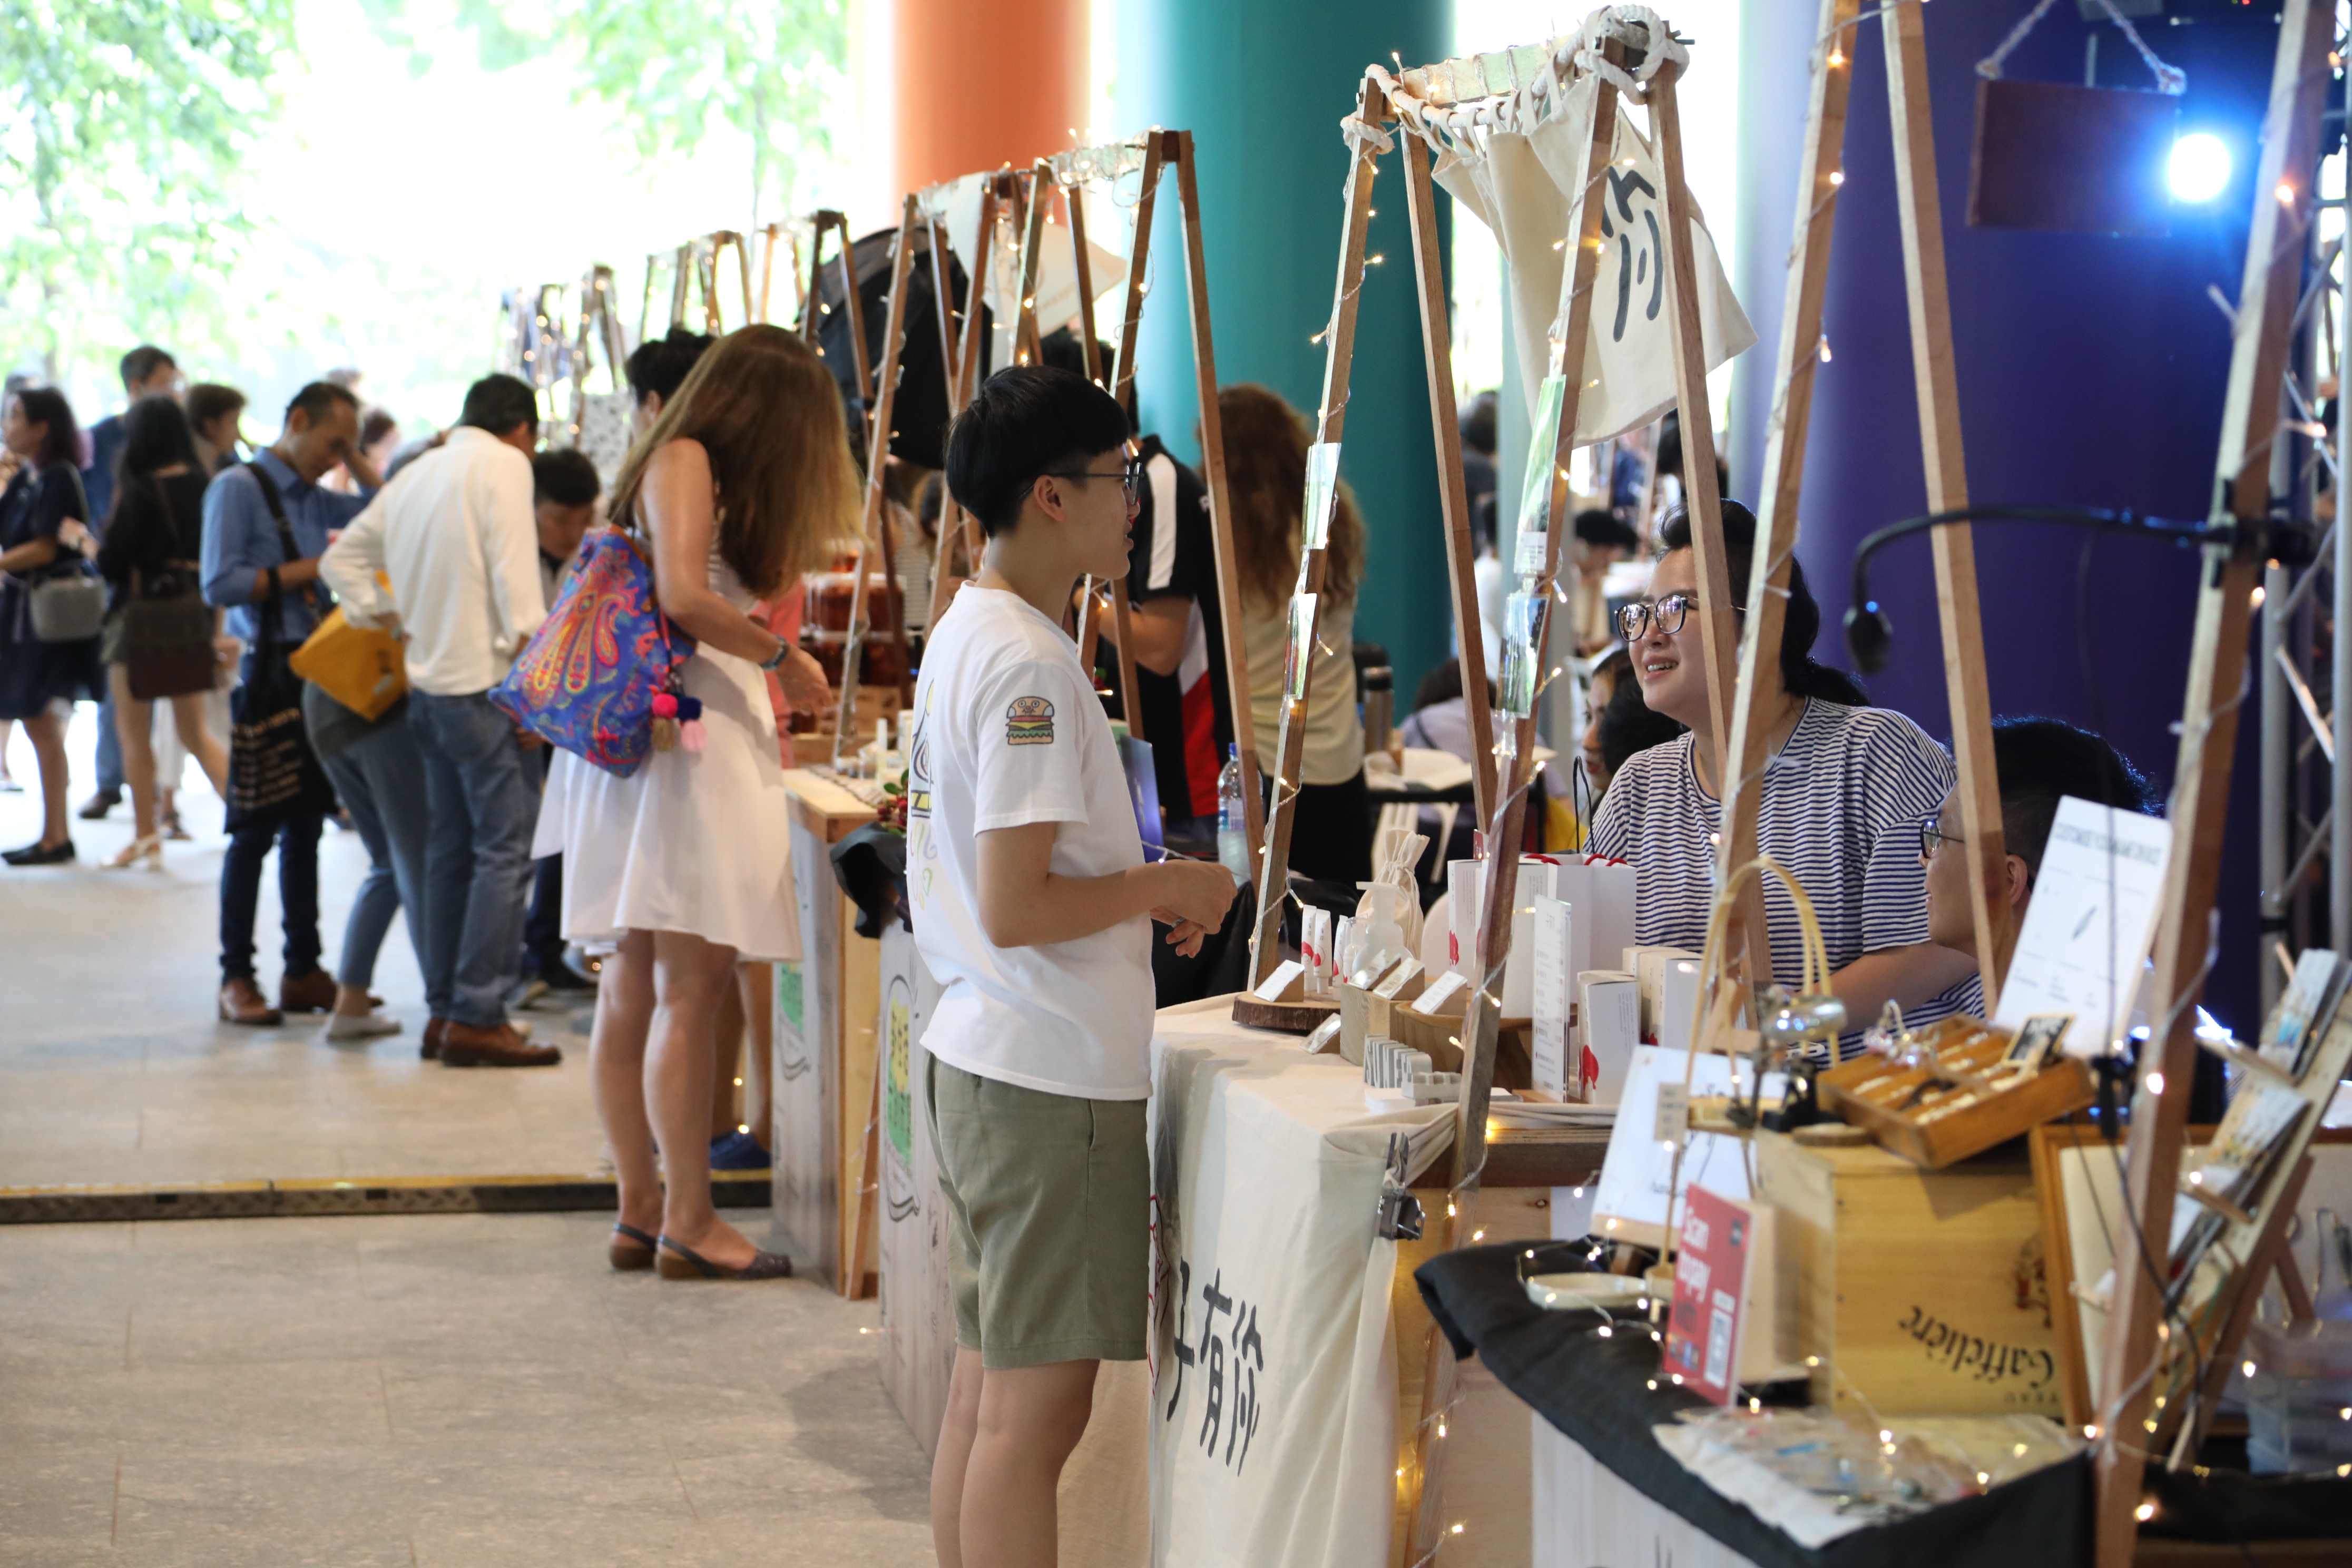 Wide shot of the customers and vendors interacting at the Makers’ Market  